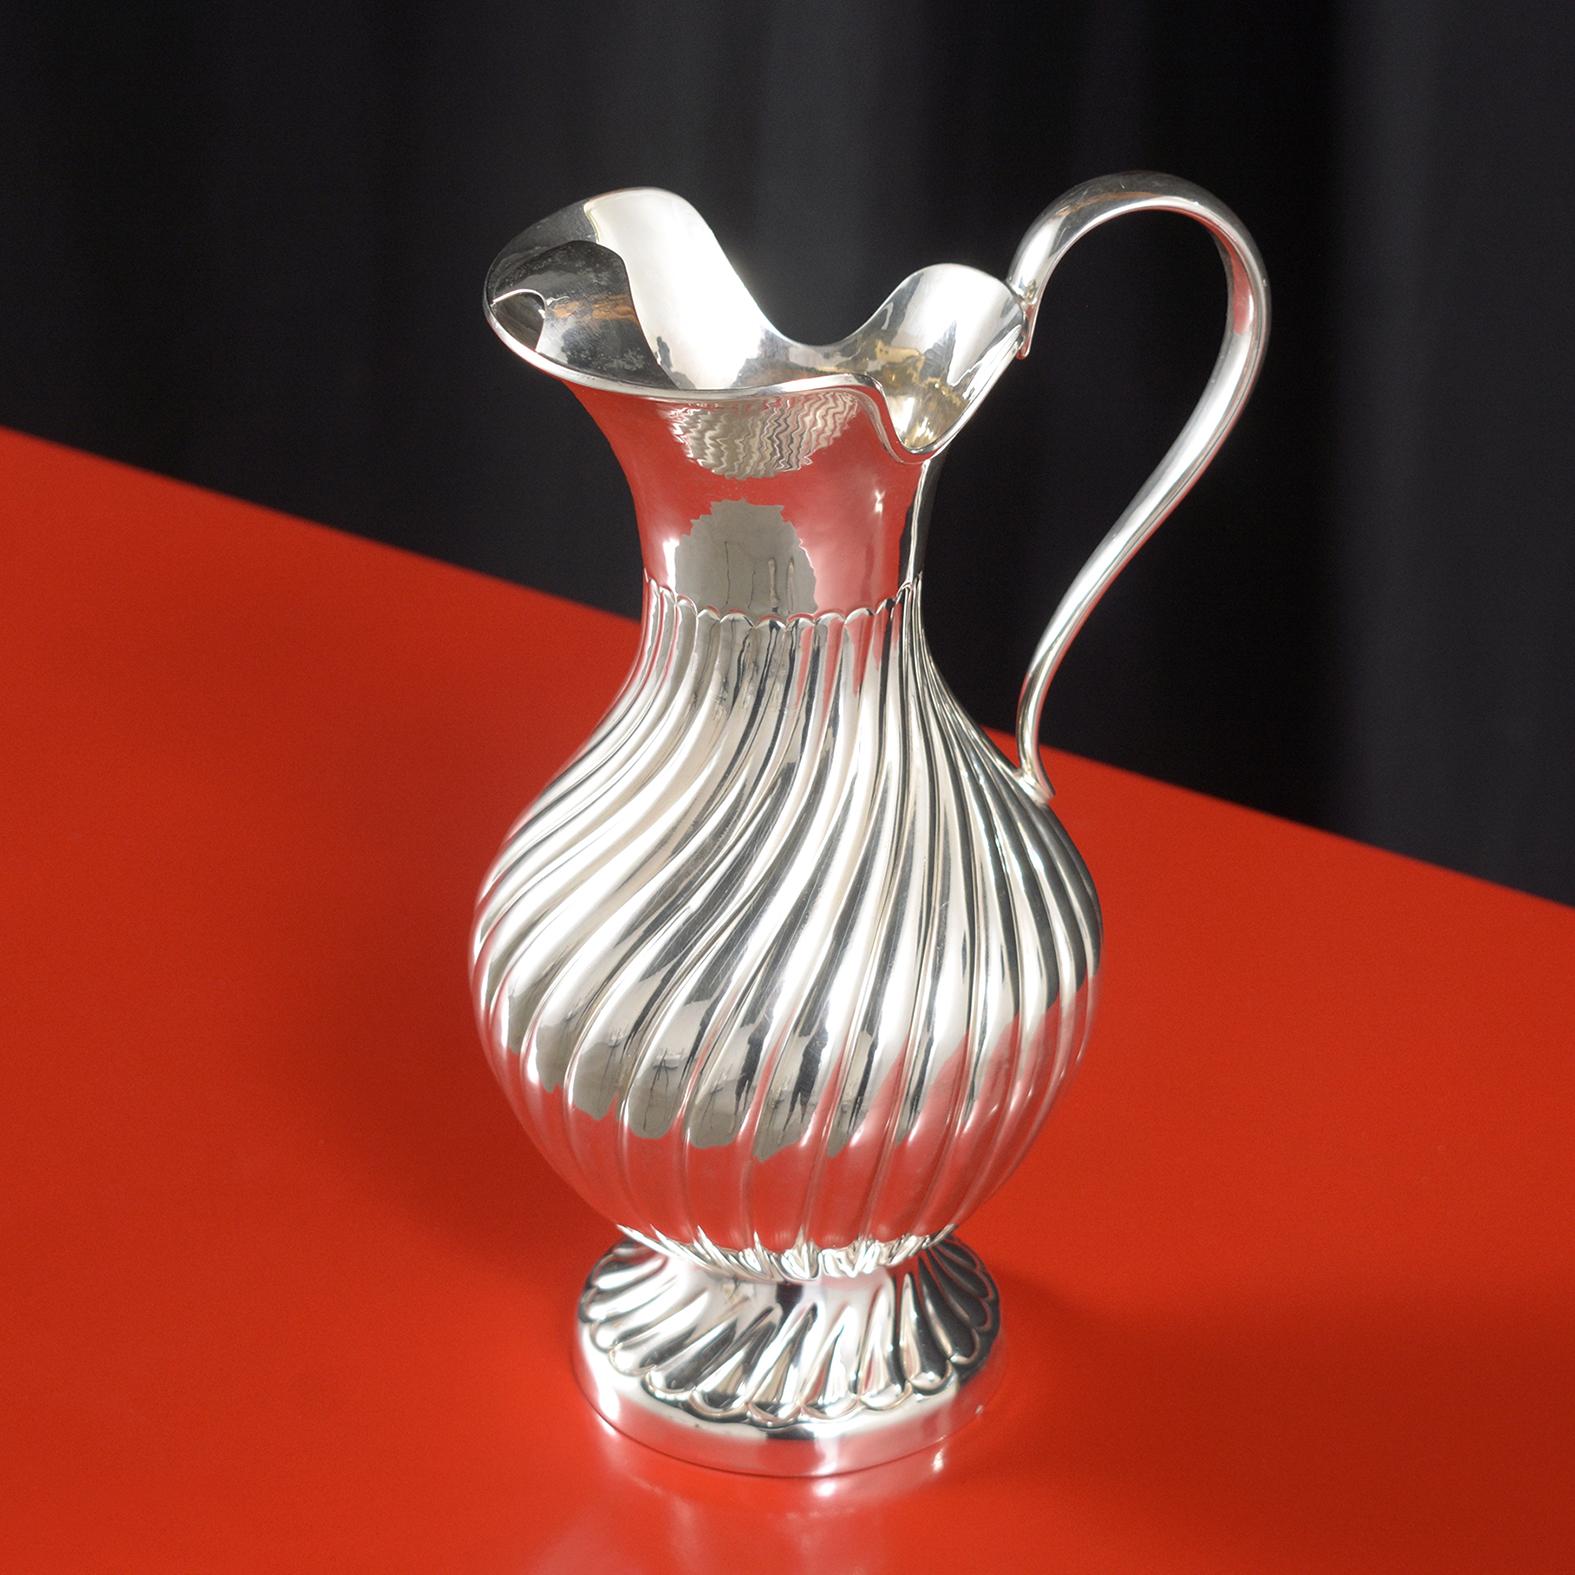 Presenting our exquisite Sterling Silver Water Pitcher, a testament to classic craftsmanship and timeless design, now expertly restored to its original splendor. Crafted from high-quality 925 stamped sterling silver, this stunning piece showcases